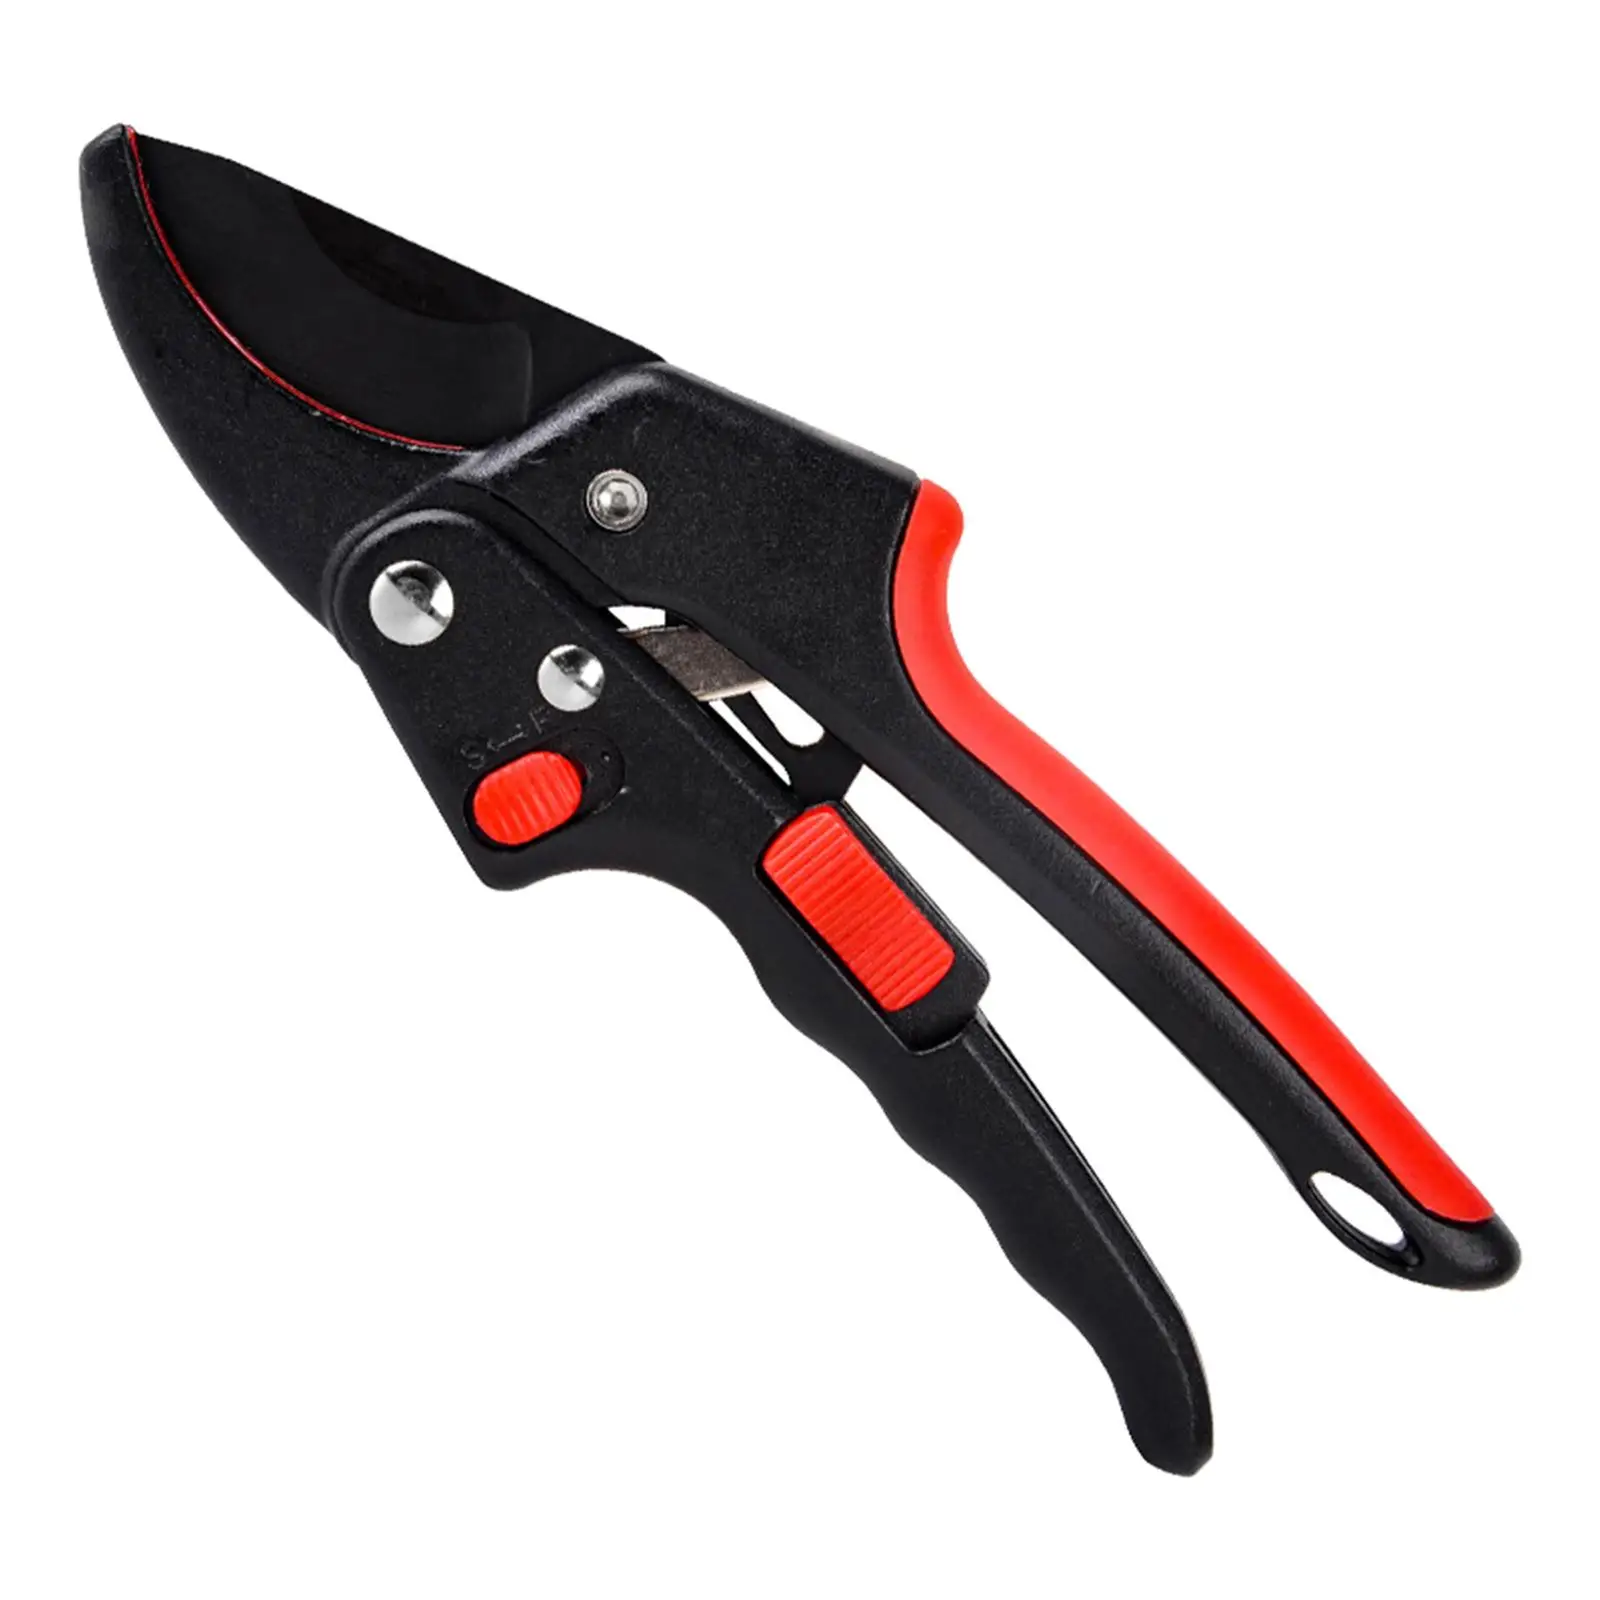 Garden Clippers Adjustable Gardening Accessory Heavy Duty Multipurpose Pruning Shear Garden Pruners for Park Orchard Bonsai